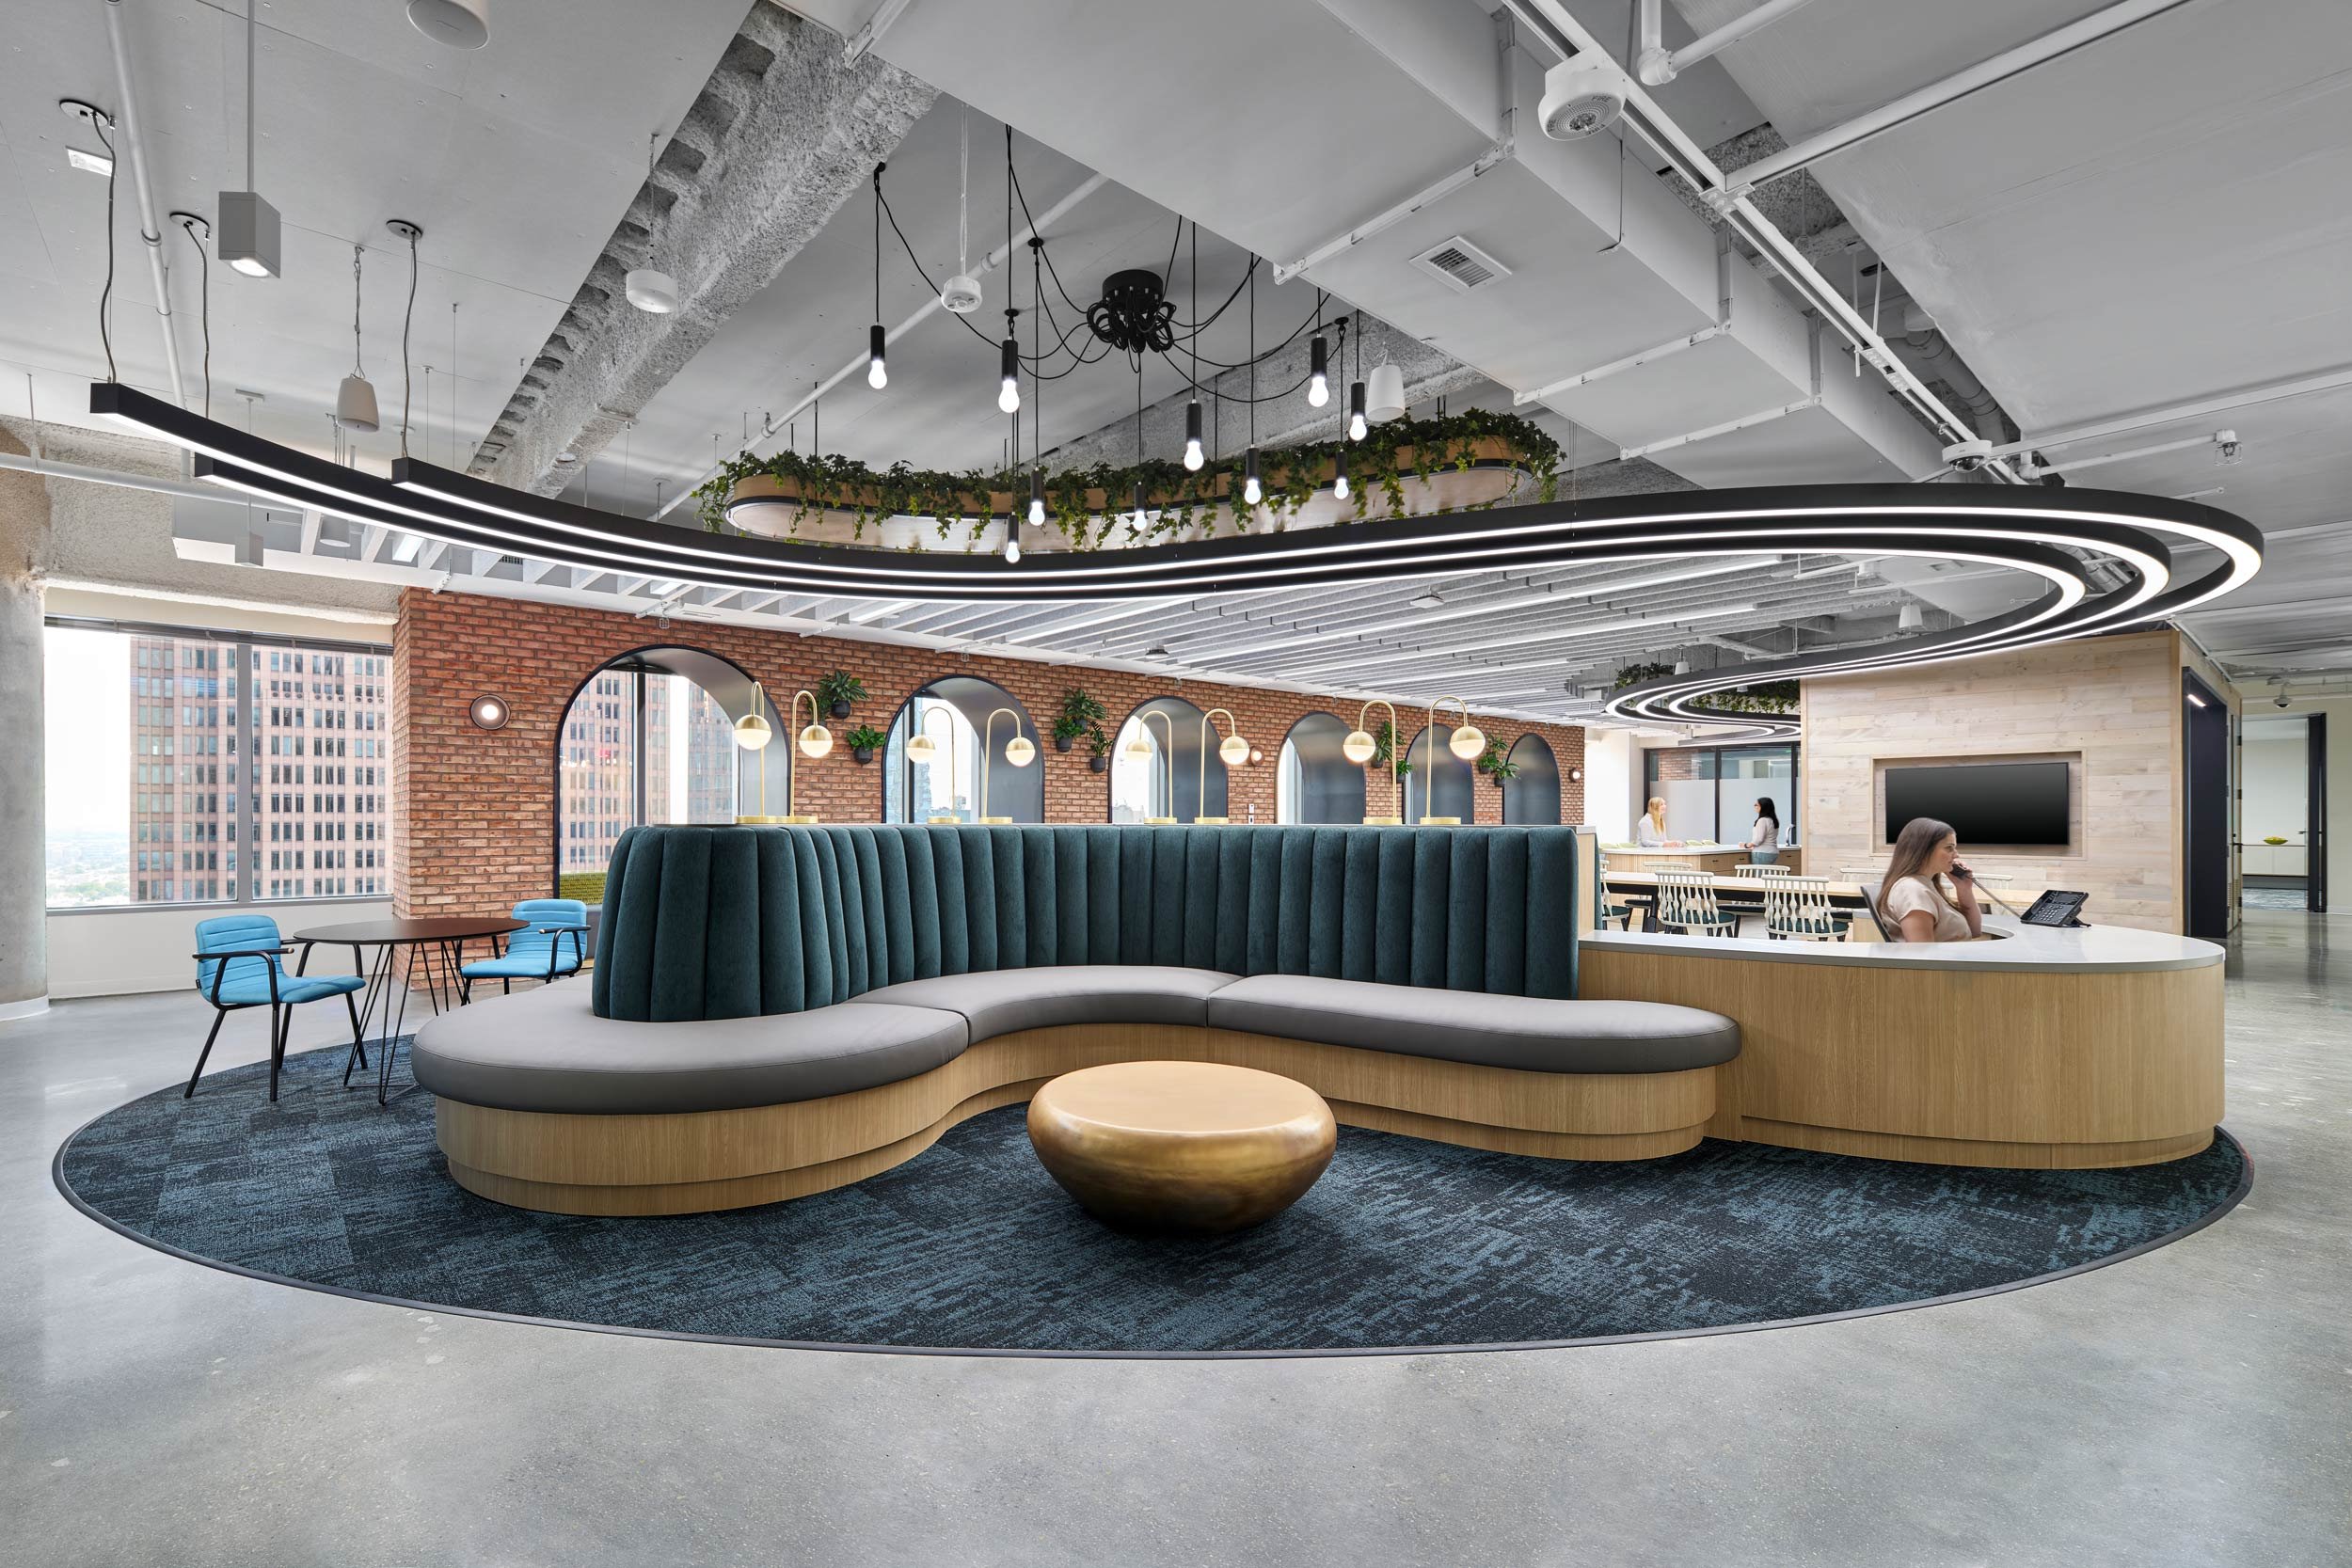  Capital One HOK Philadelphia, Pa See more in  Workplace  